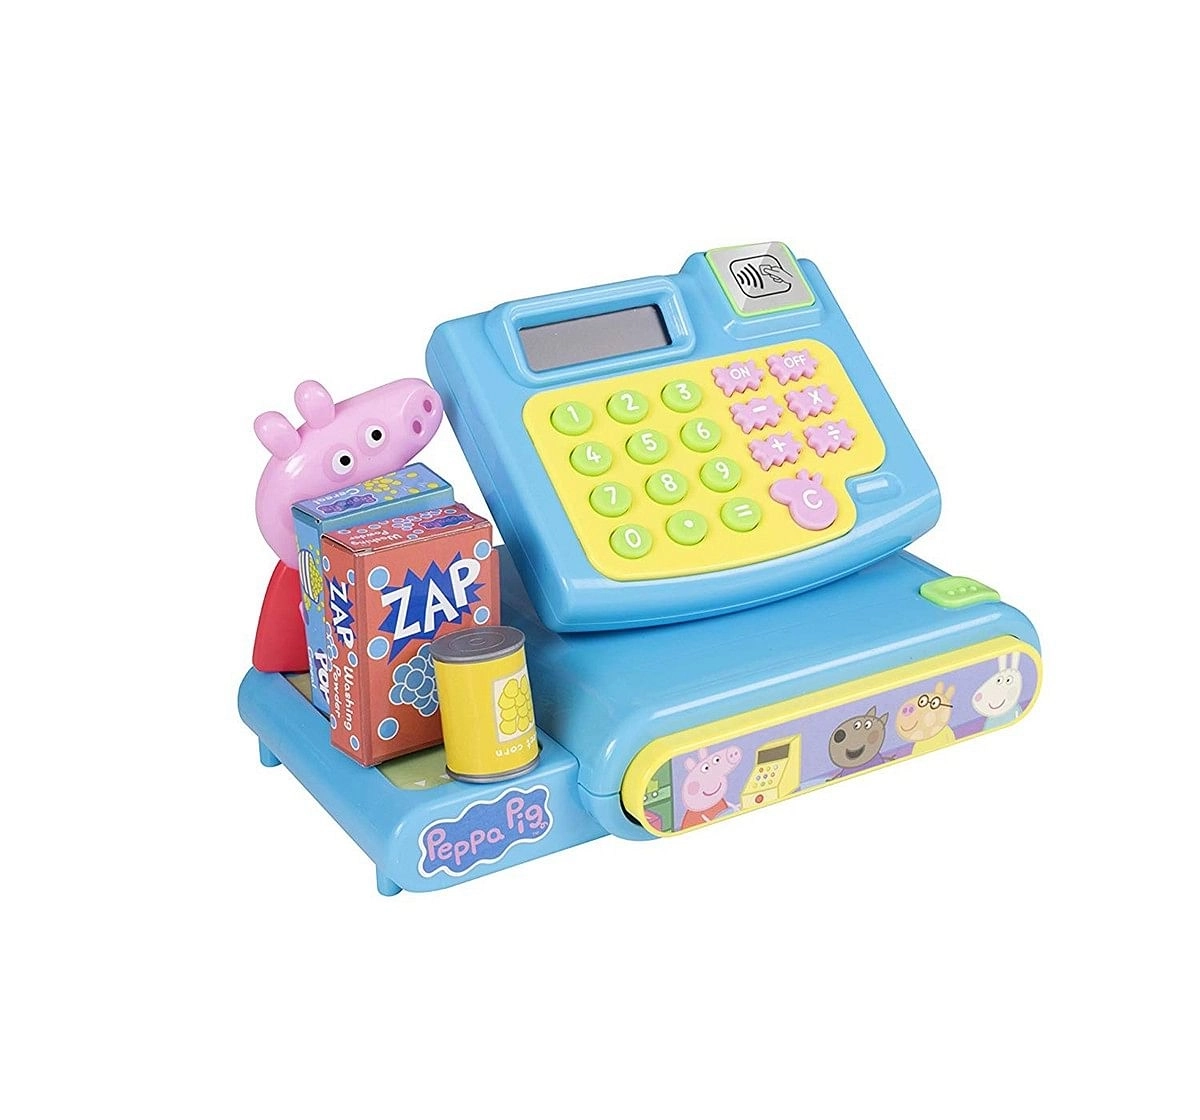 Peppa Pig Peppa's Cash register Roleplay sets for age 3Y+ 